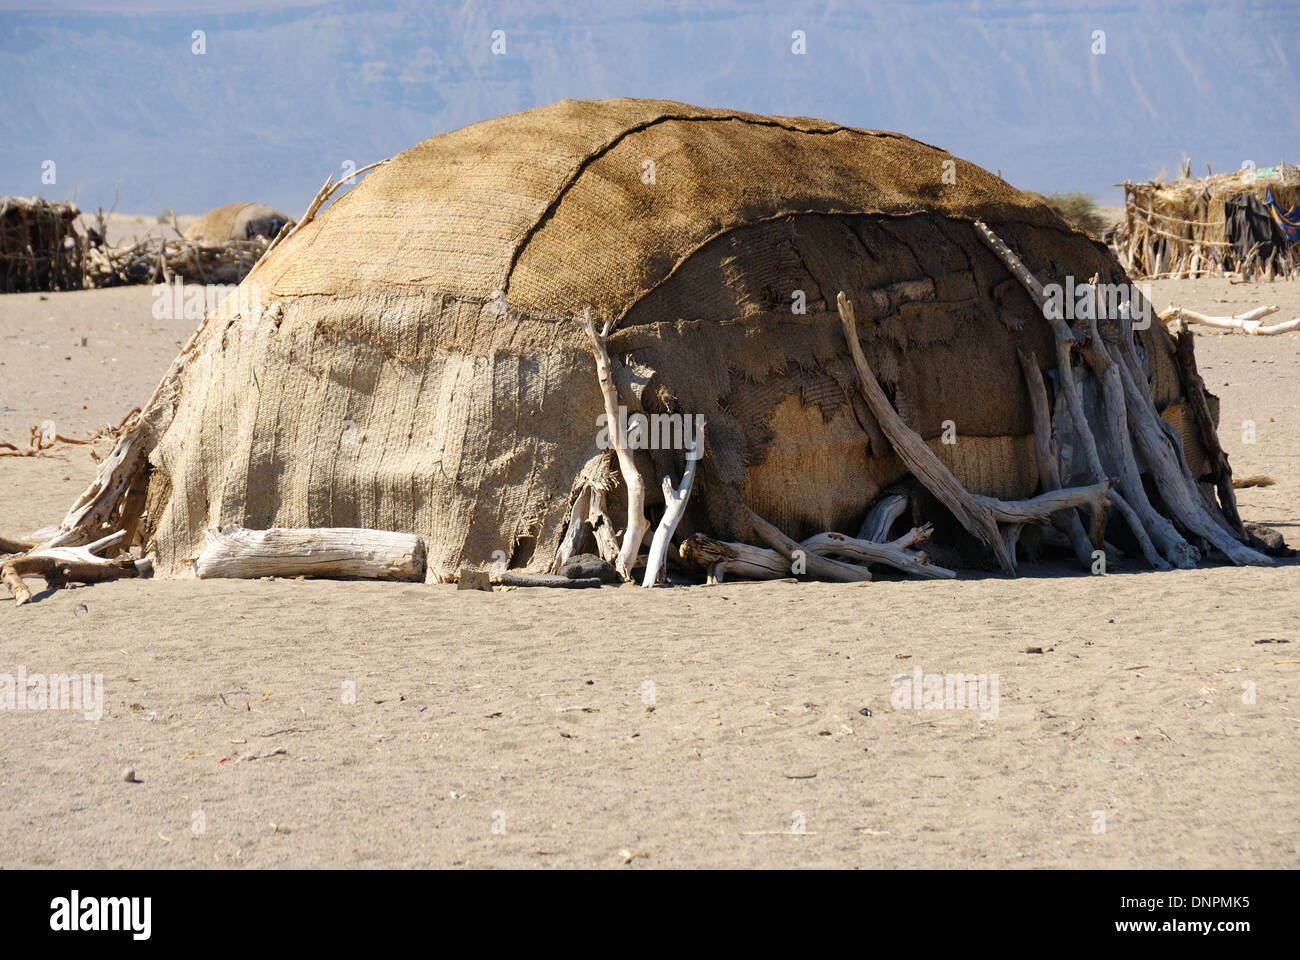 Afar hut in the south desert of Djibouti, Horn of Africa Stock Photo